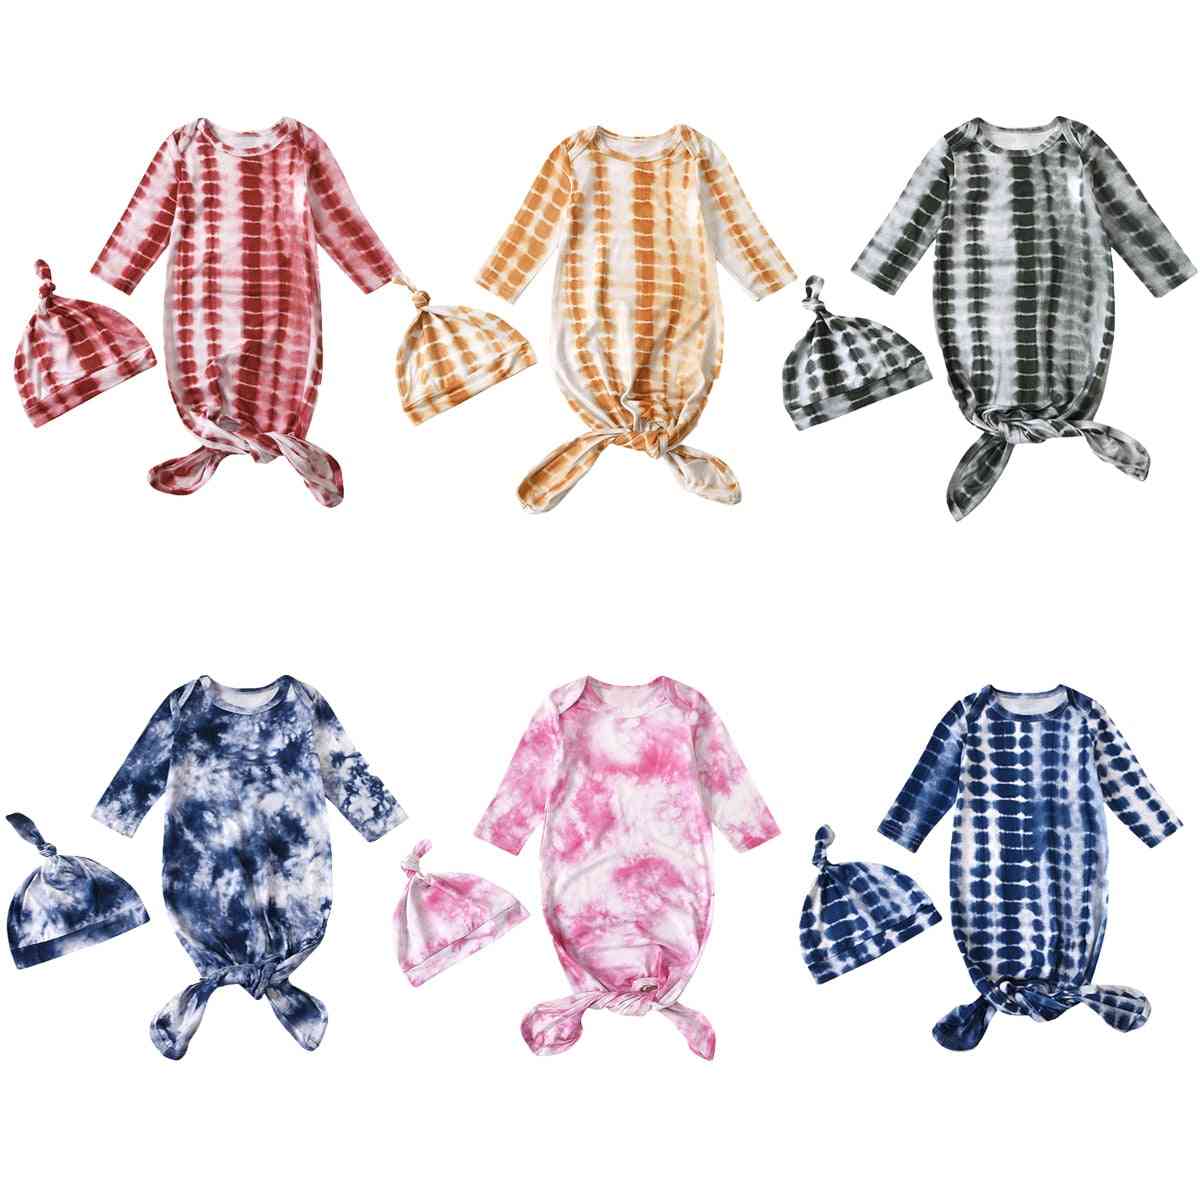 Long Sleeve, Tie And Die Pattern-printed Sleeping Wraps With Hats For Babies